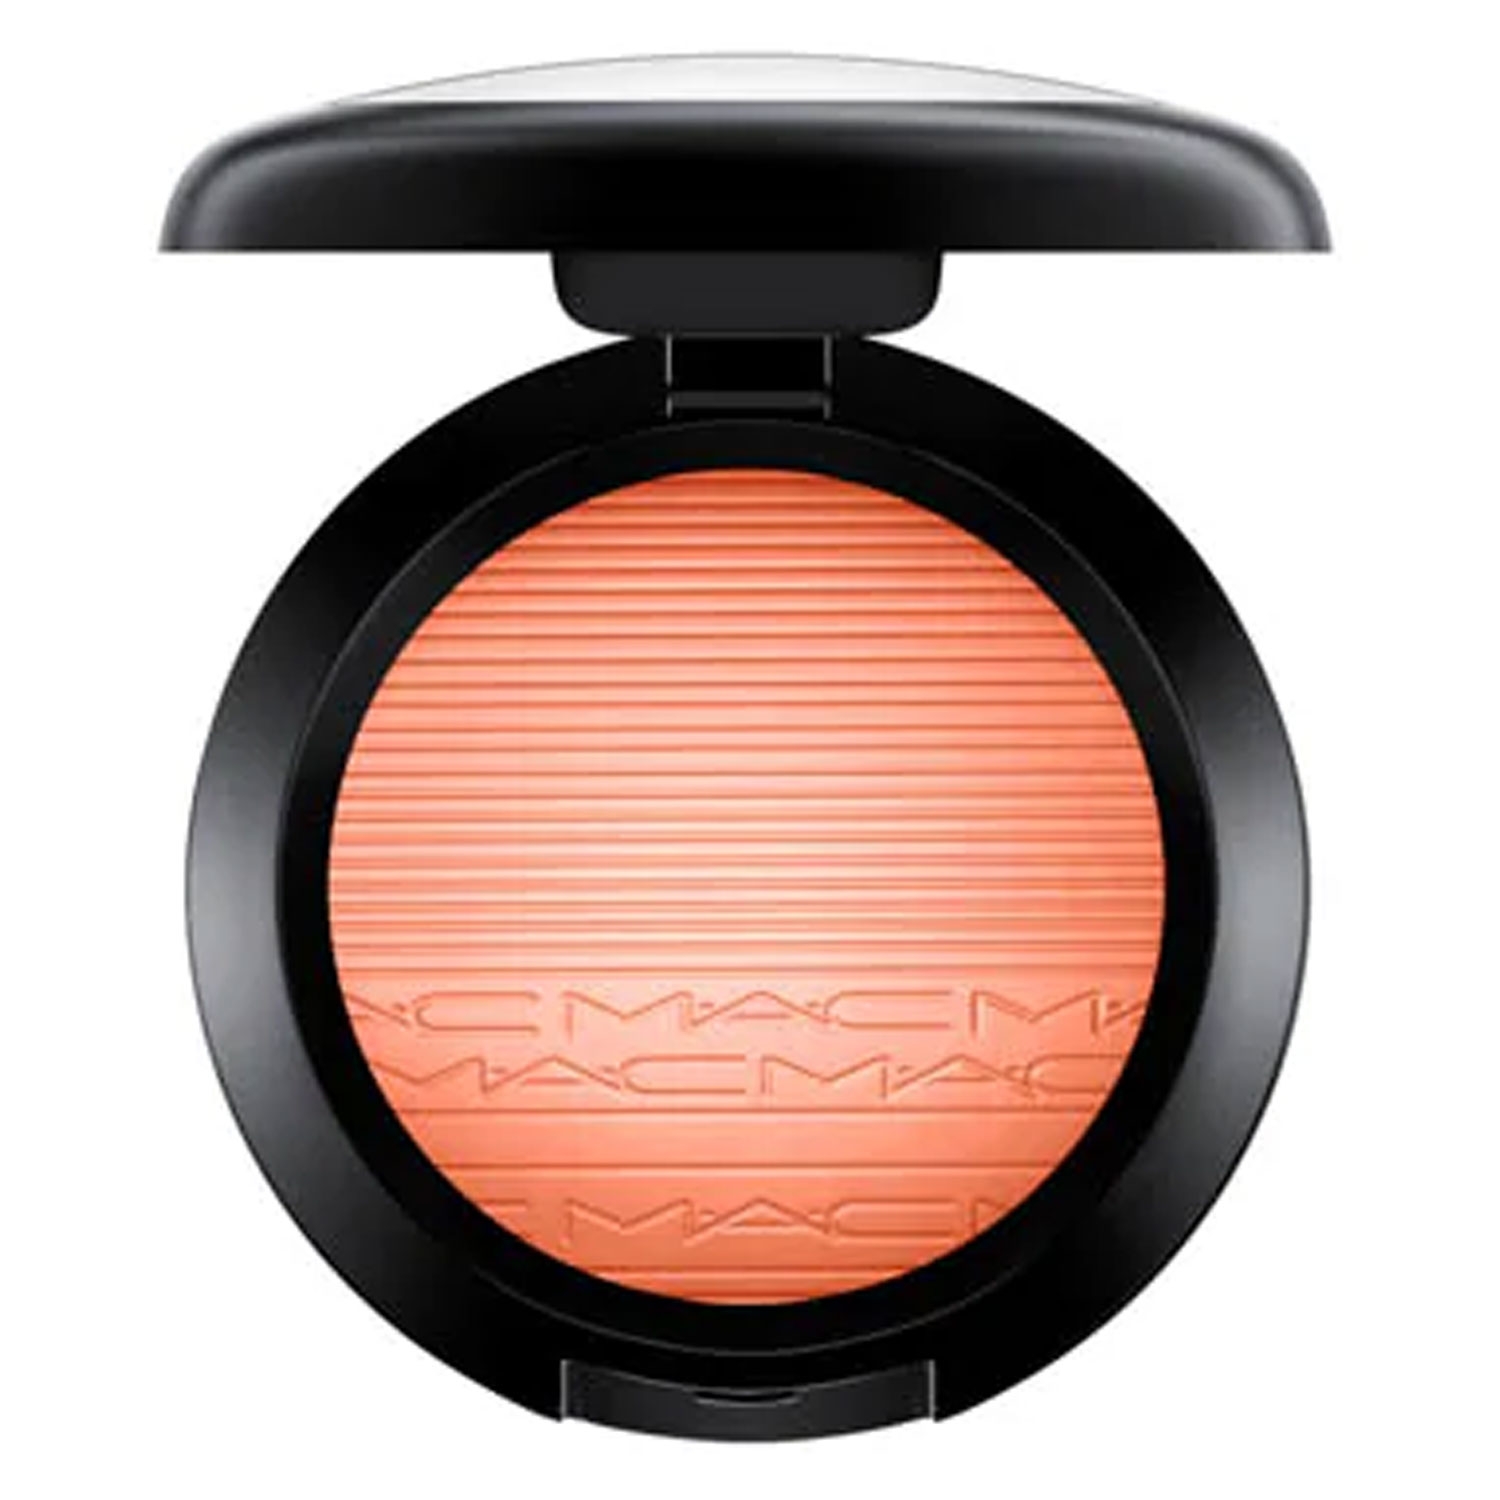 Product image from Extra Dimension - Blush Just a Pinch